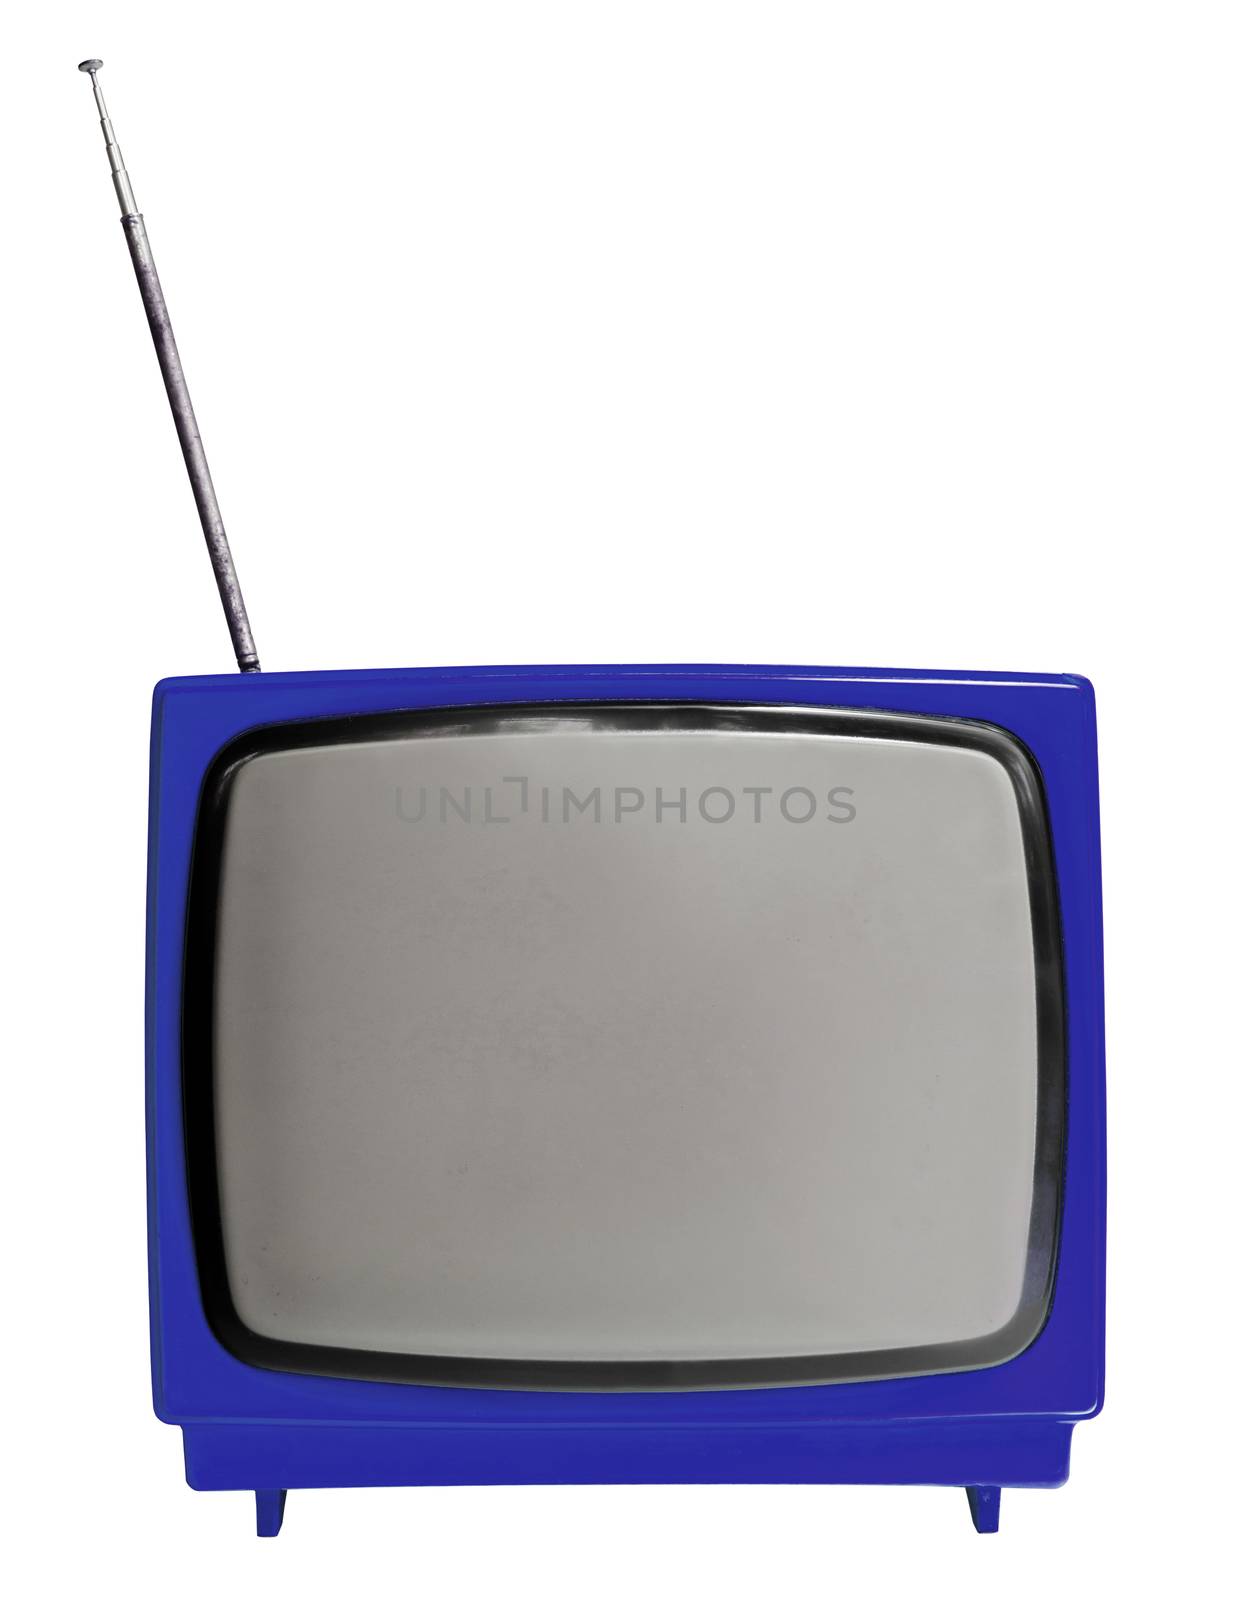 vintage television isolated on the white background by Gamjai